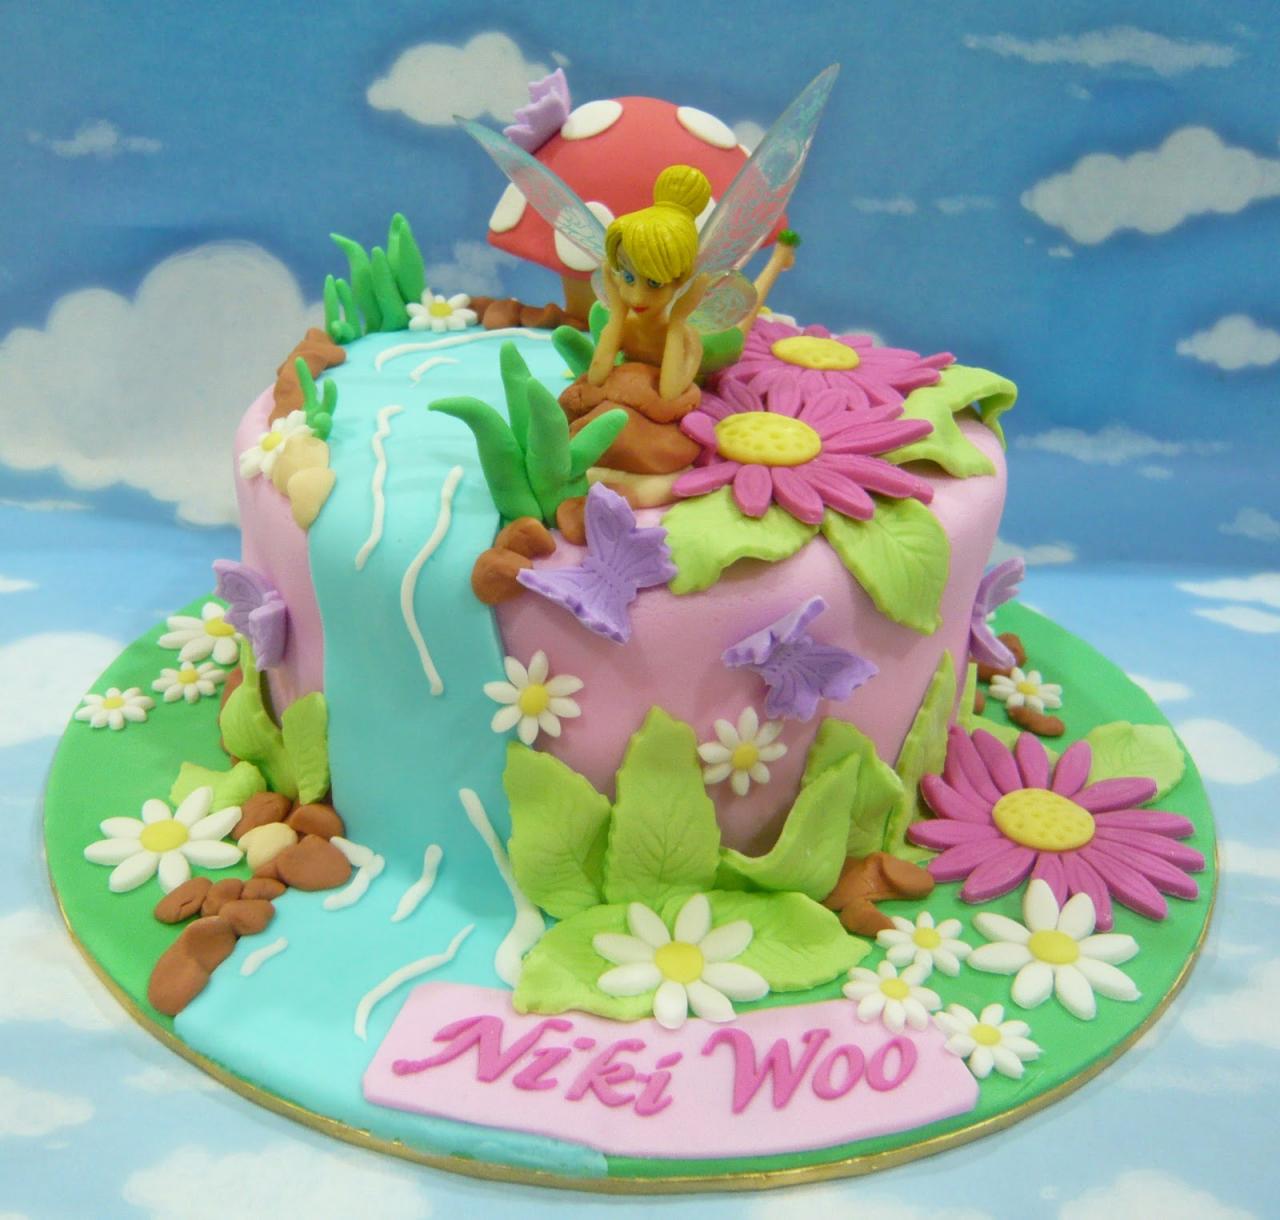 Tinkerbell cake decorations